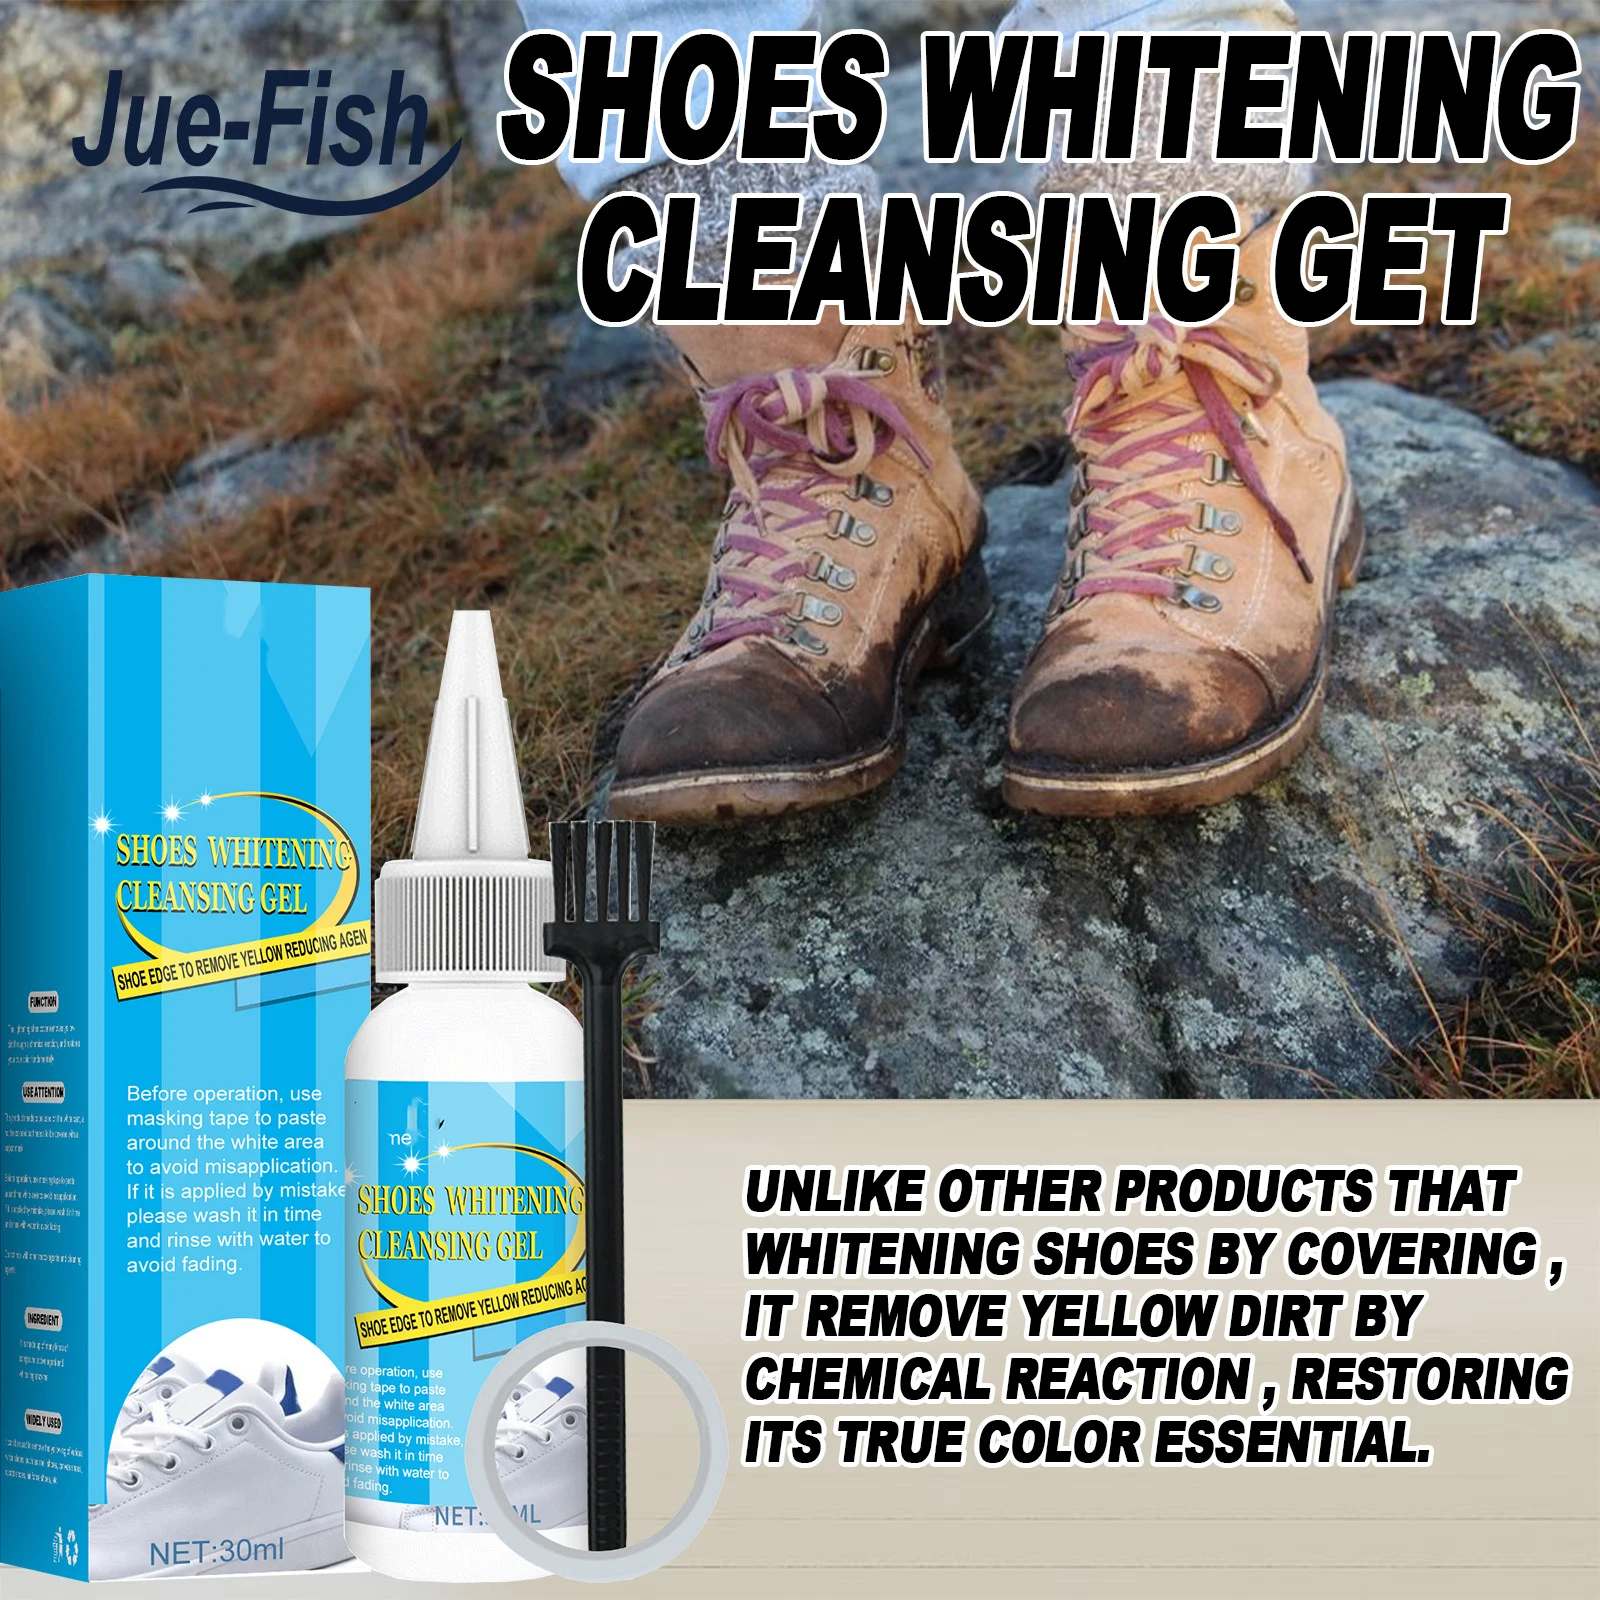 

Newly Shoes Whitening Cleansing Gel Shoe Fast Acting Cleaner Foaming Stain Remover for Shoes Shoes Whitening Cleansing Gel